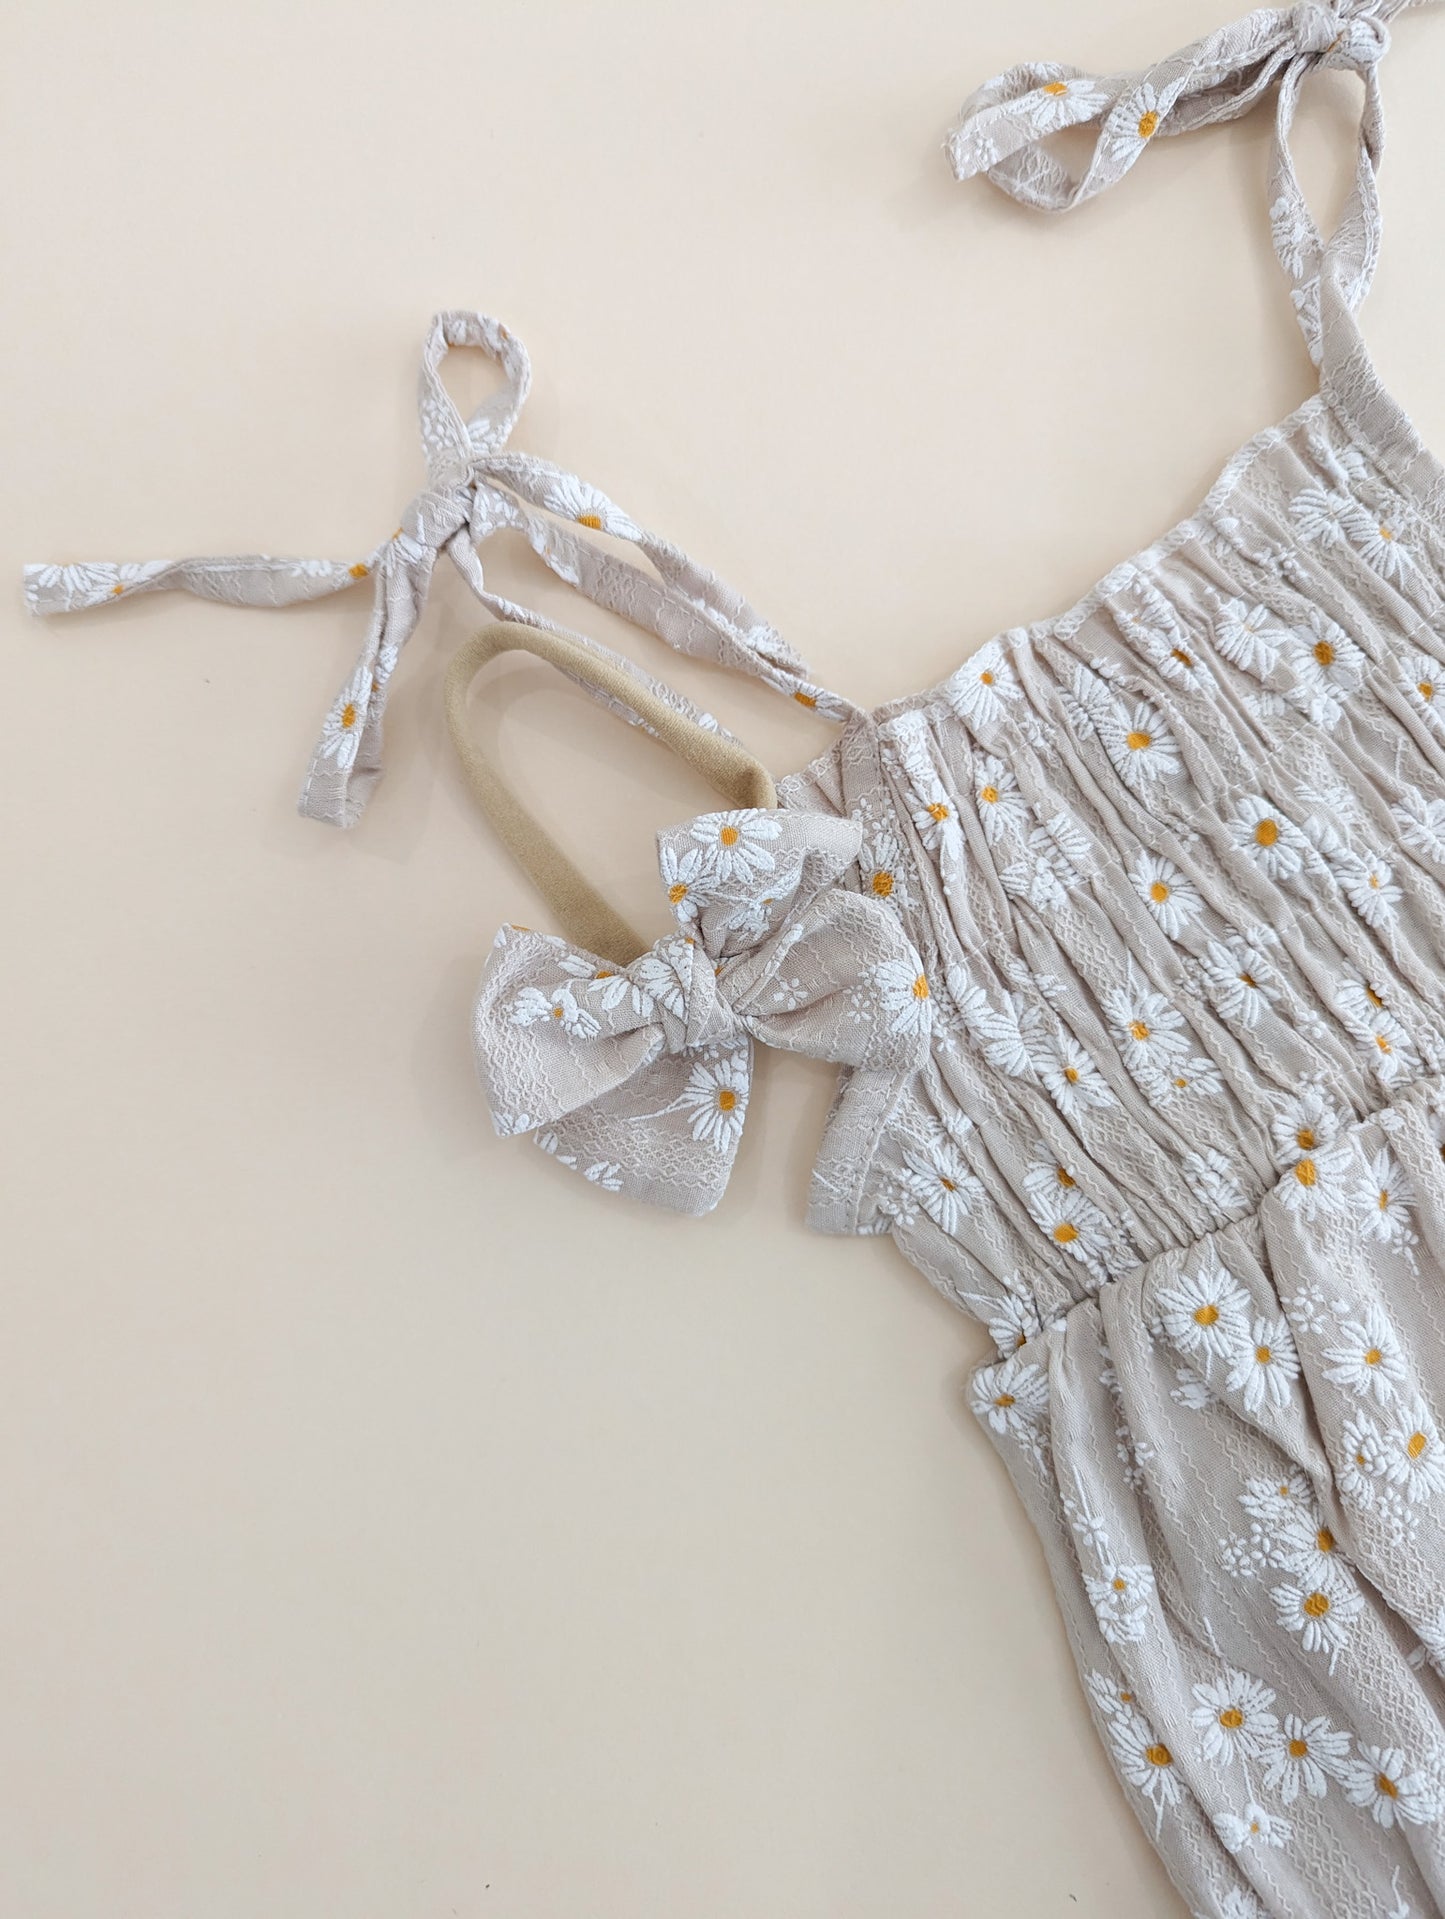 Daisy romper + matching bow